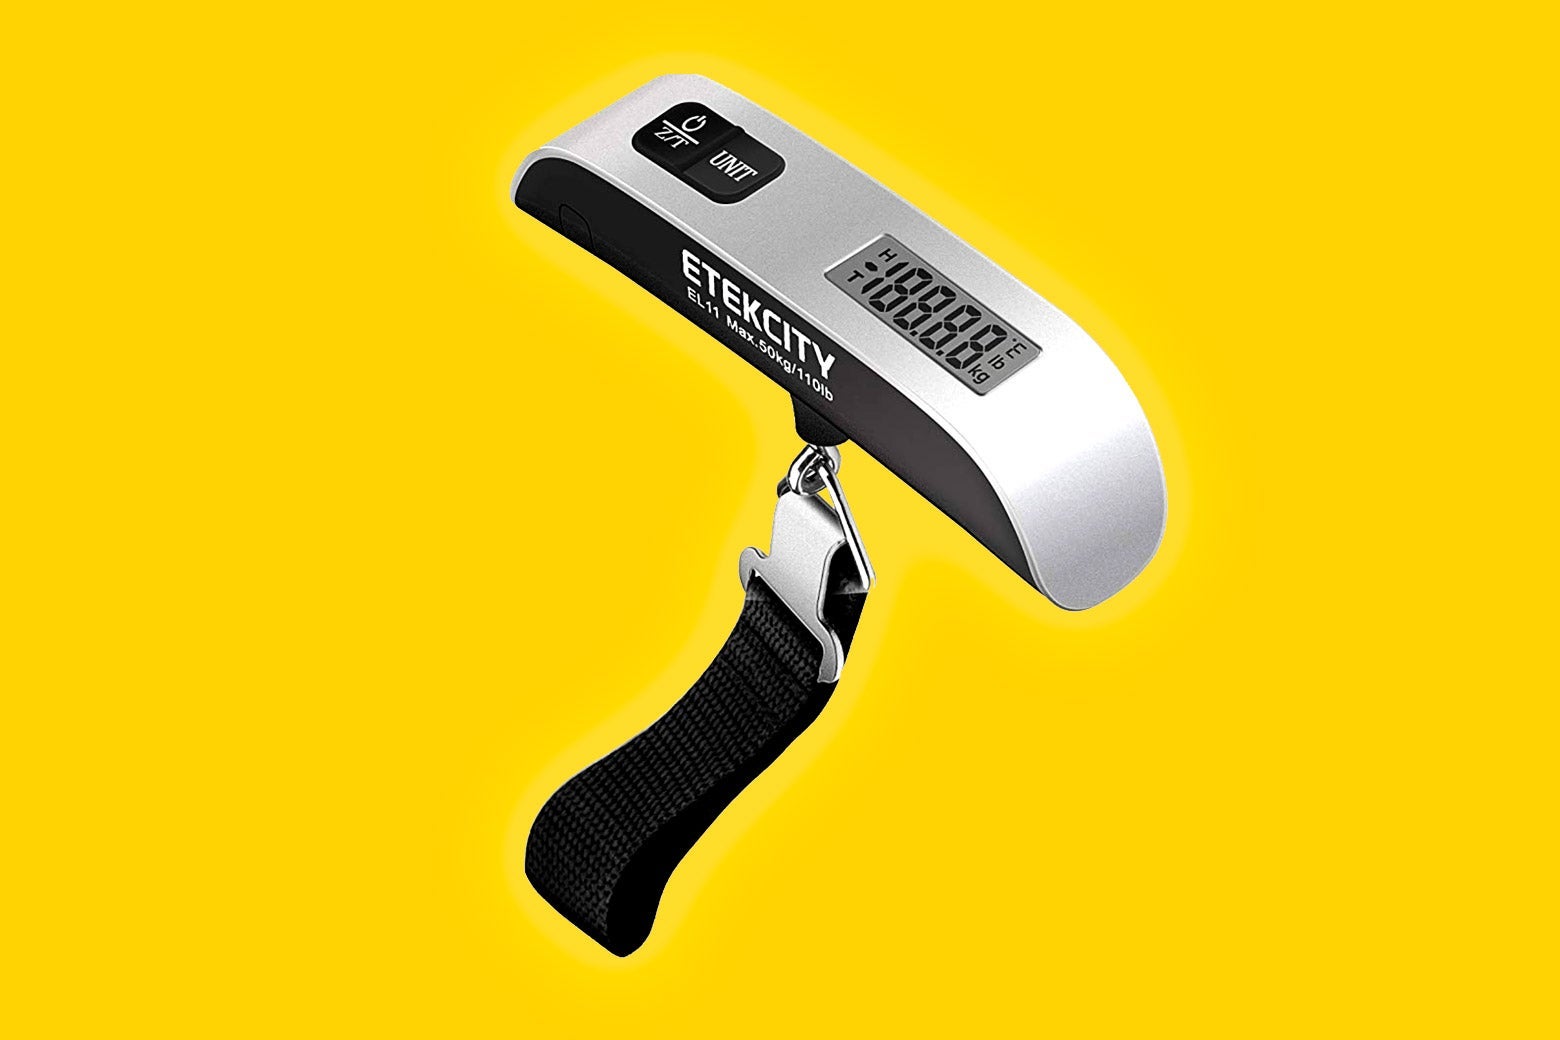 Etekcity Digital Luggage Scale on sale for less than $10.